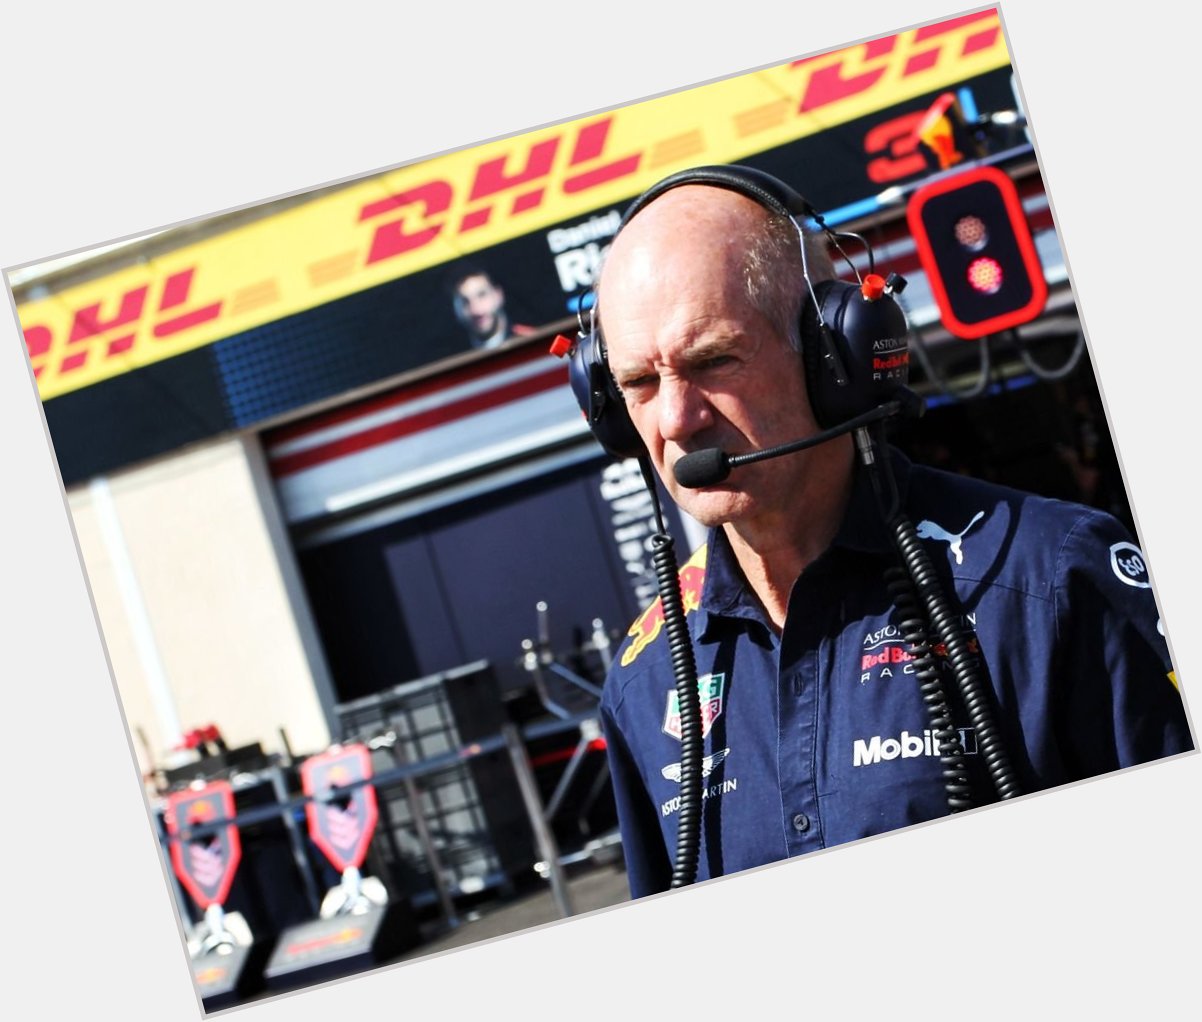 Happy Birthday to Adrian Newey, one of the greatest minds on the grid! 